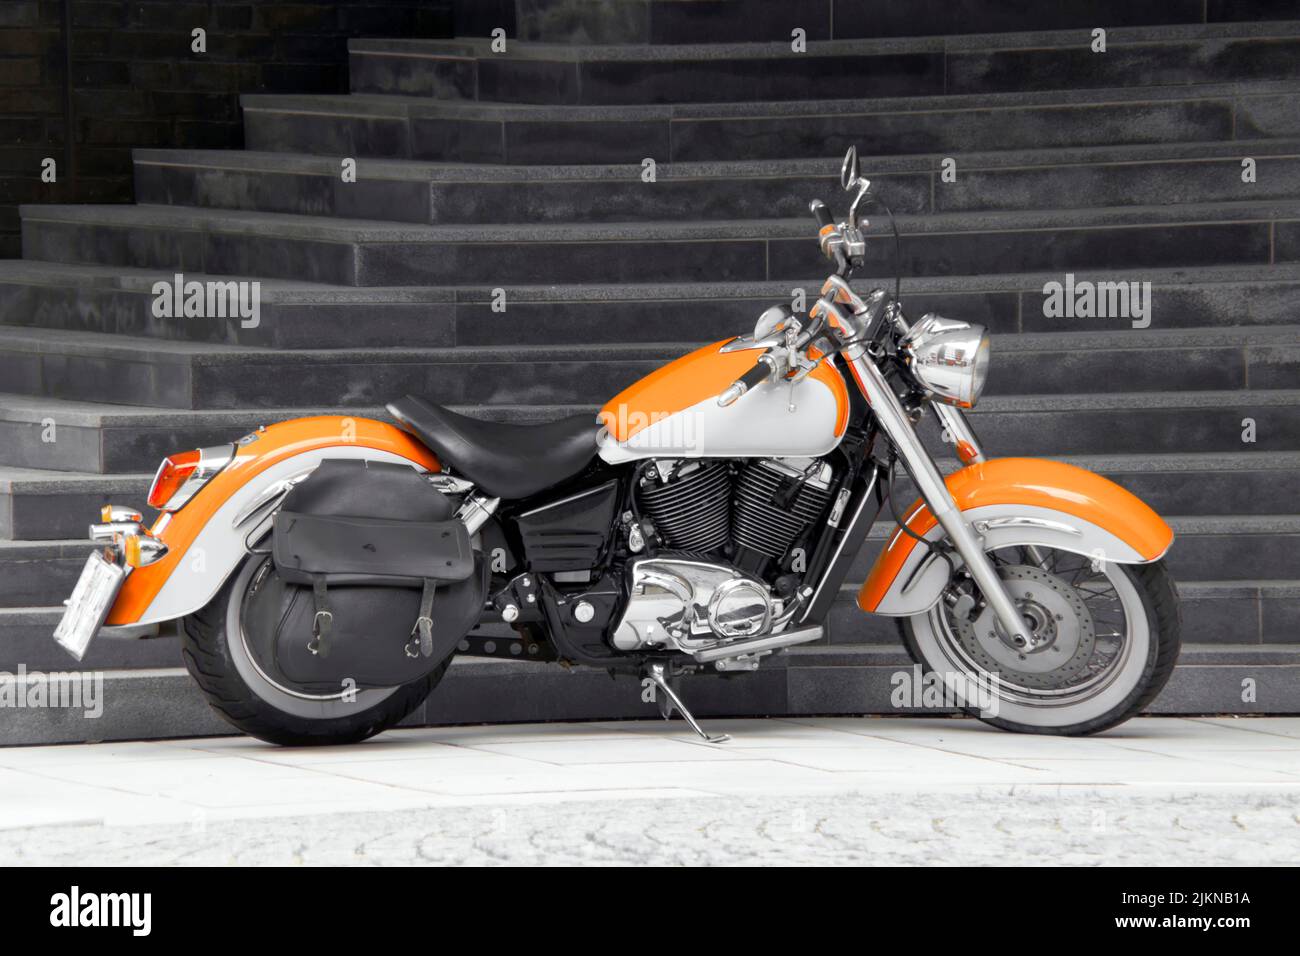 A modern orange motorcycle parked outdoors Stock Photo